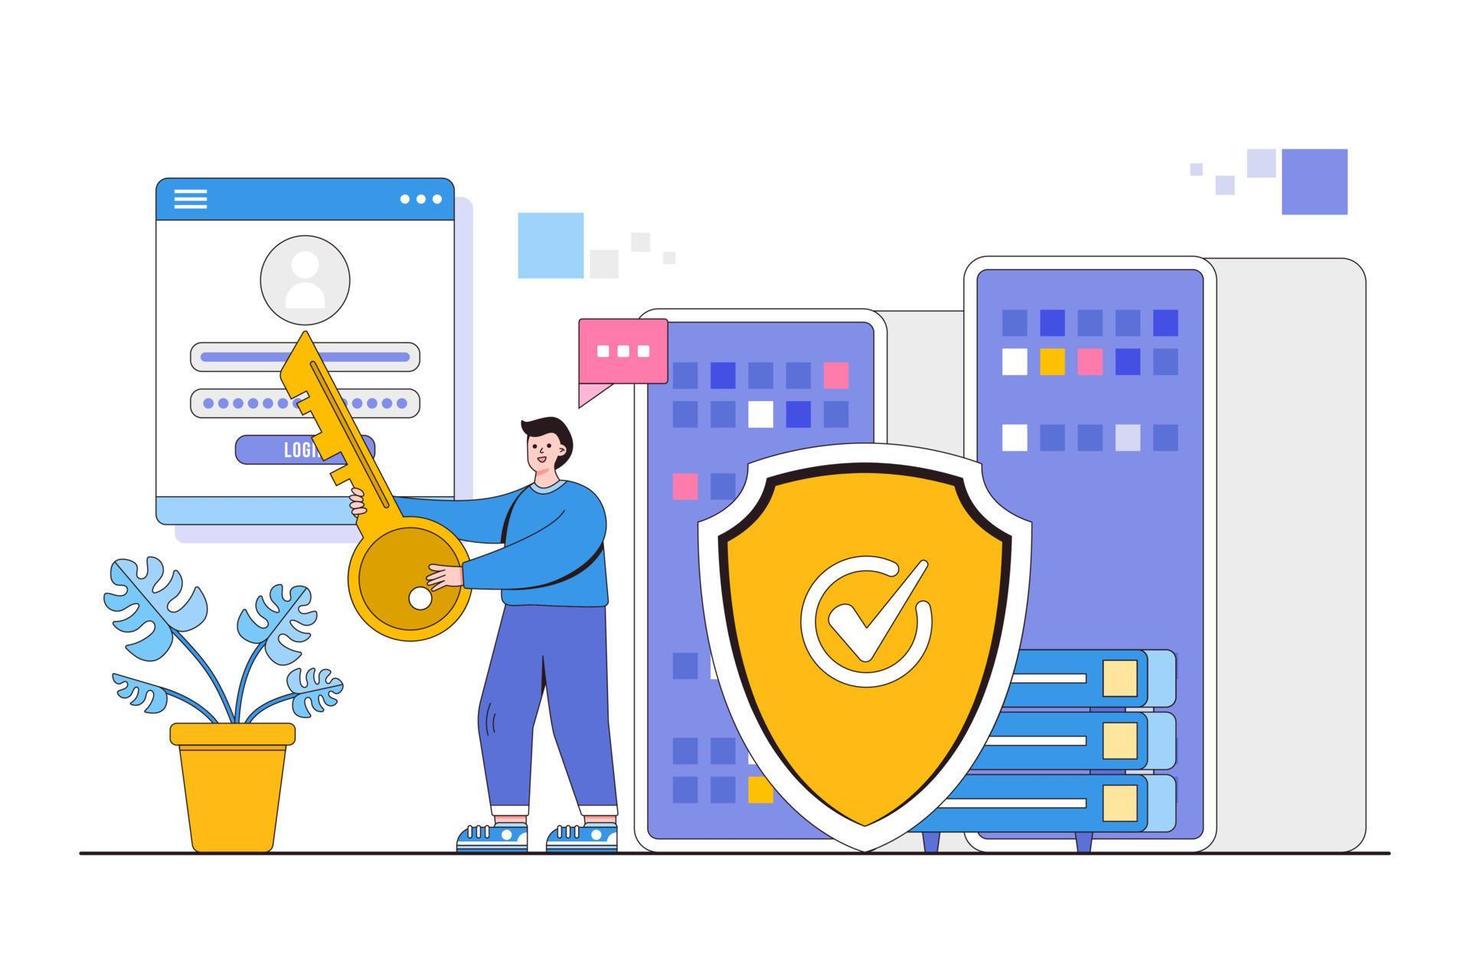 Cyber security vector illustration concept with characters. Data security, protected access control, privacy data protection. Modern flat style for landing page, web banner, infographics, hero images